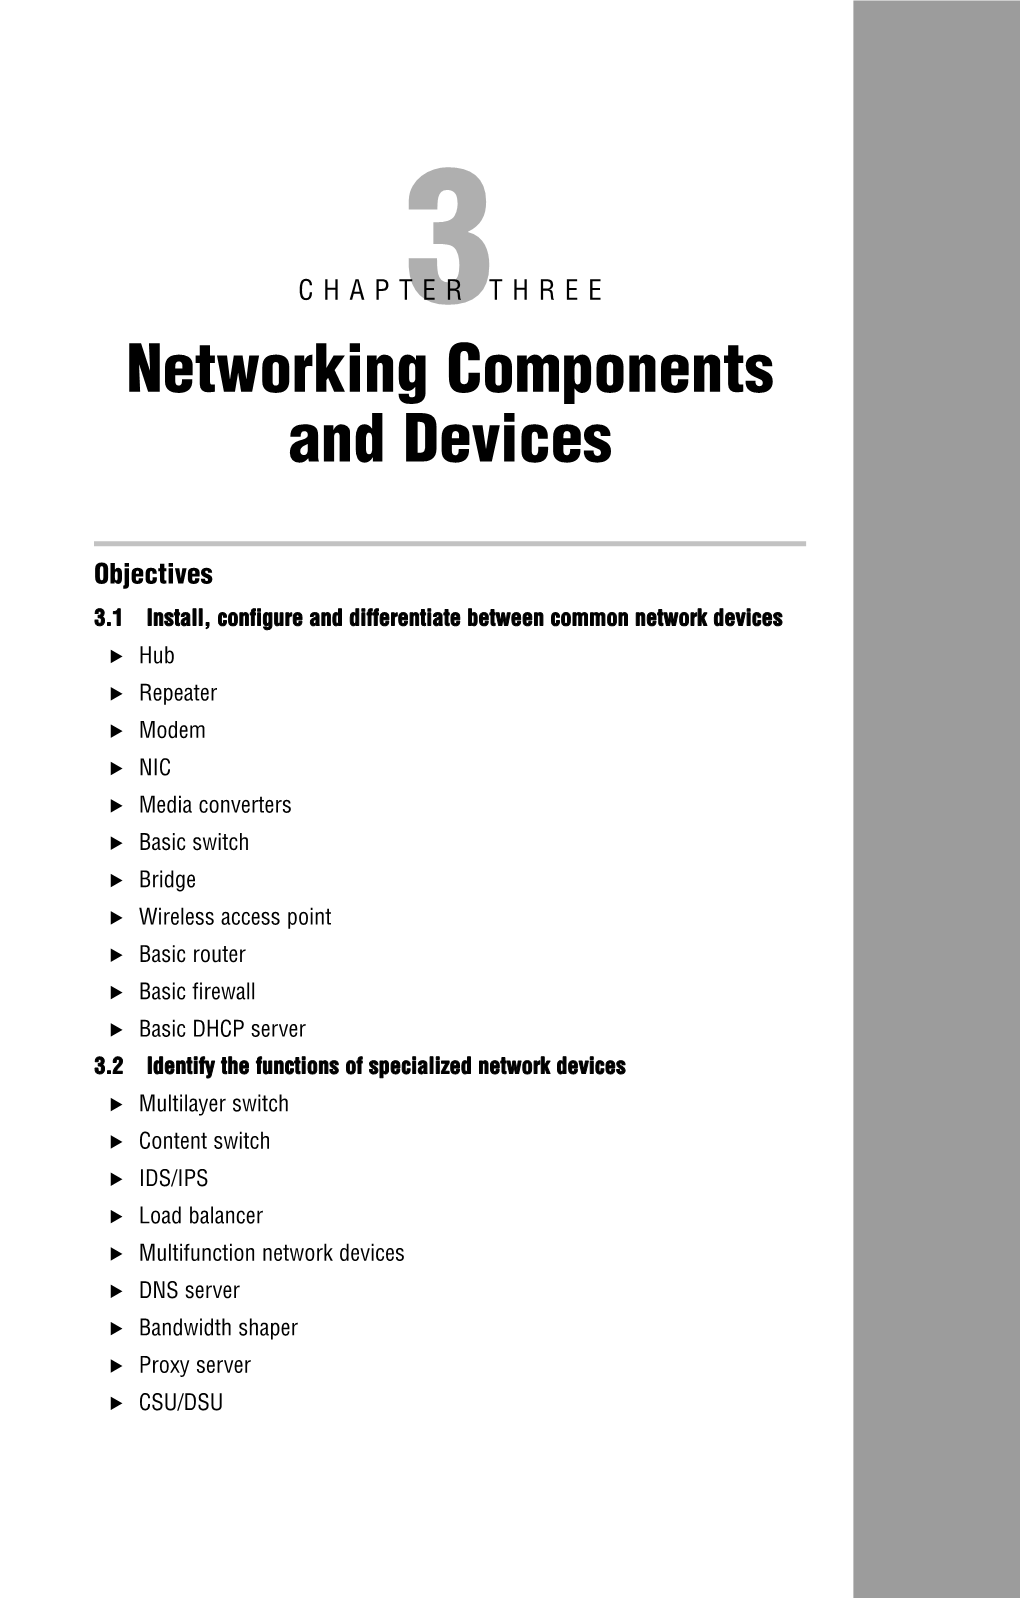 Networking Components and Devices